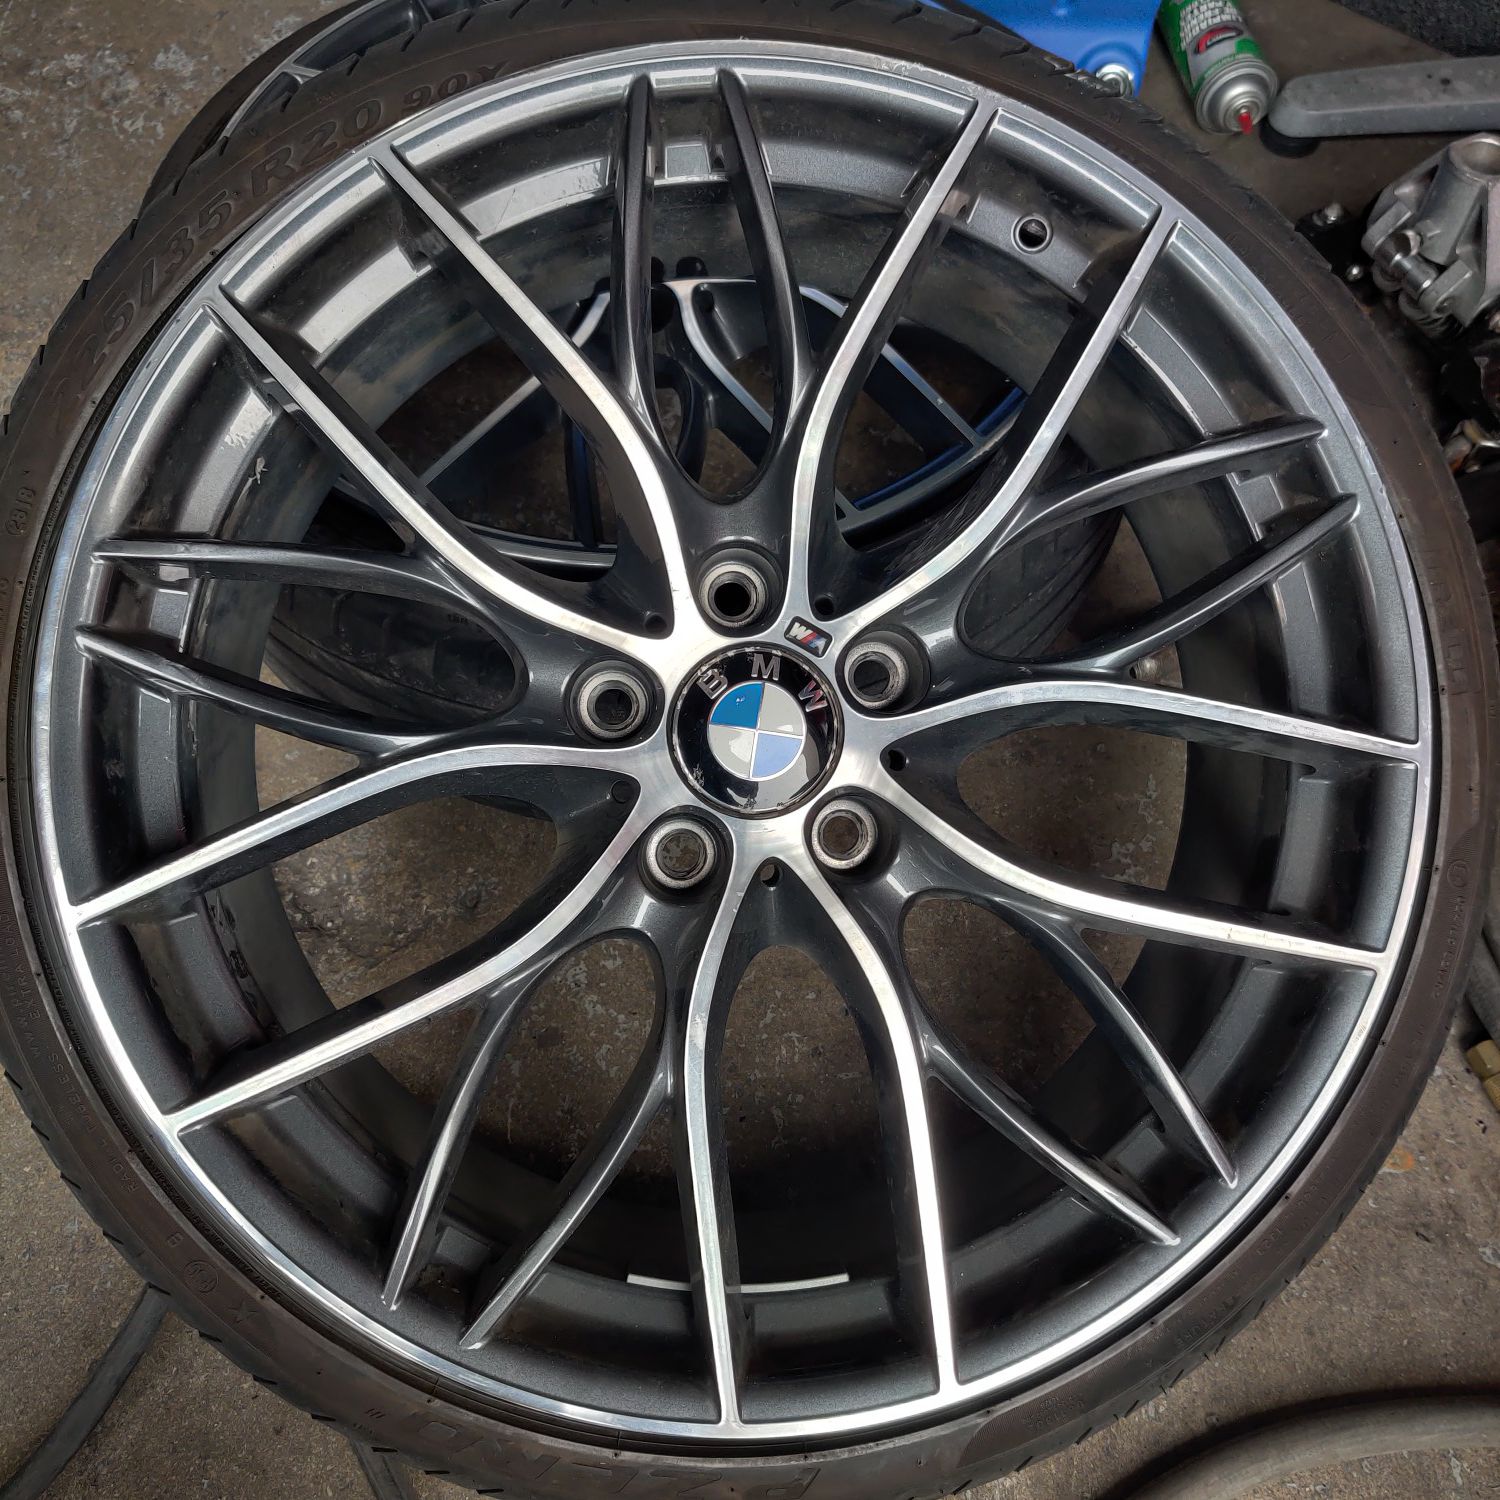 20 INCH STAGGERED BMW RIMS IN GOOD CONDITION.